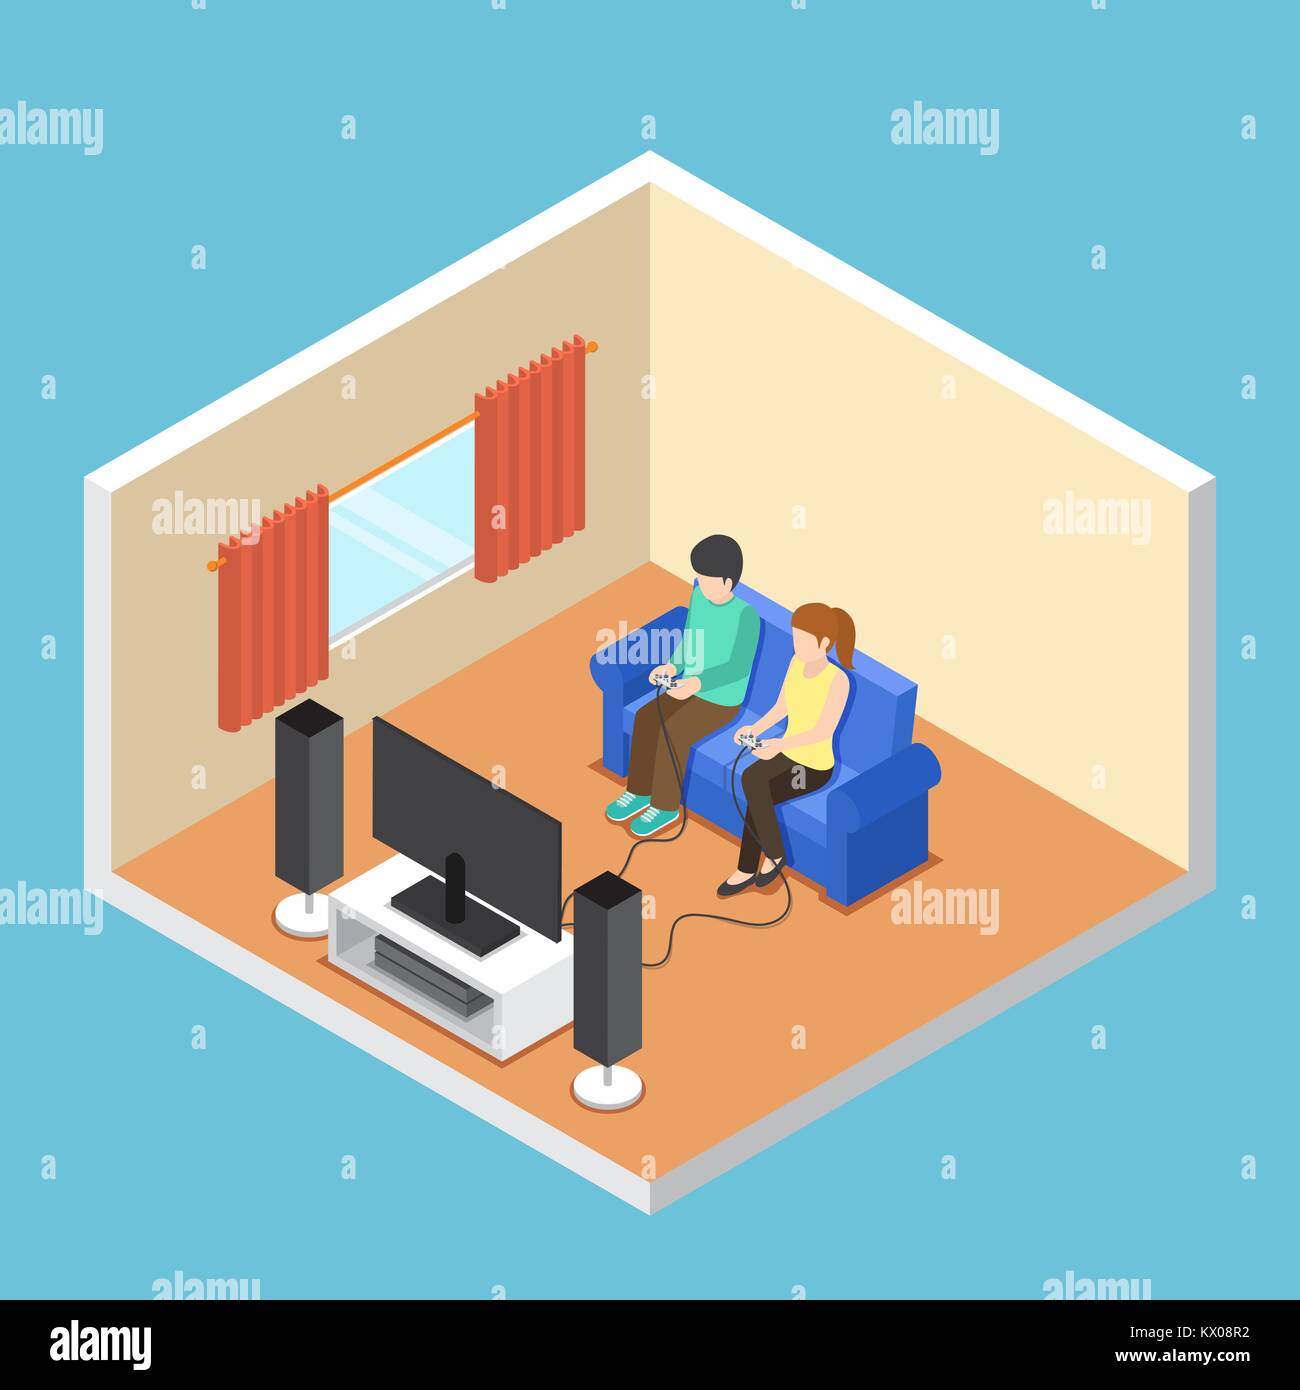 Flat 3d isometric man and woman playing video game in the living room. Stock Vector